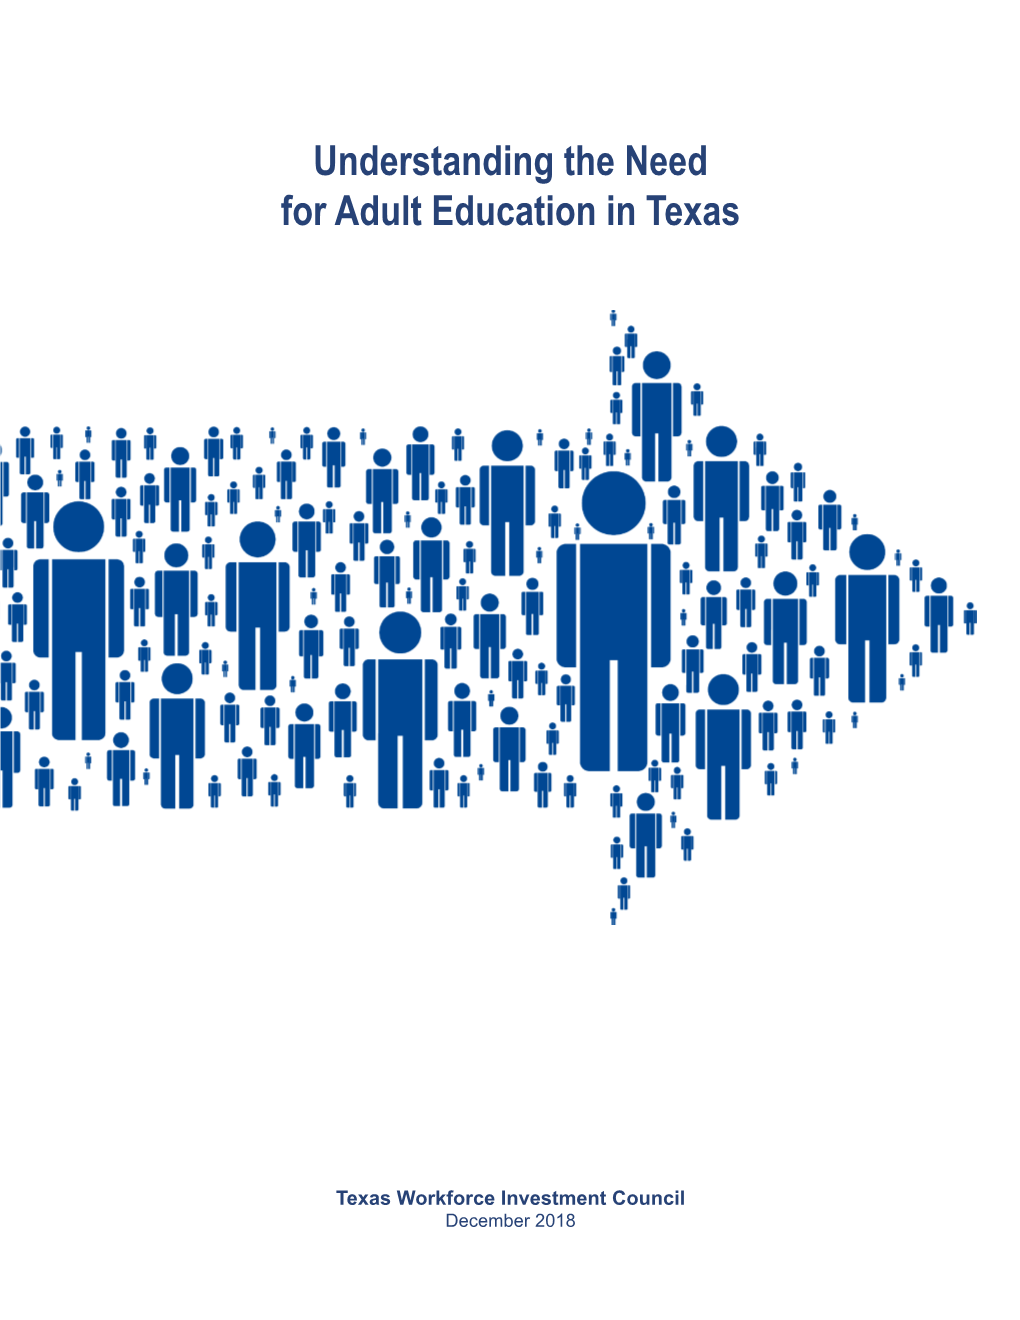 Understanding the Need for Adult Education in Texas